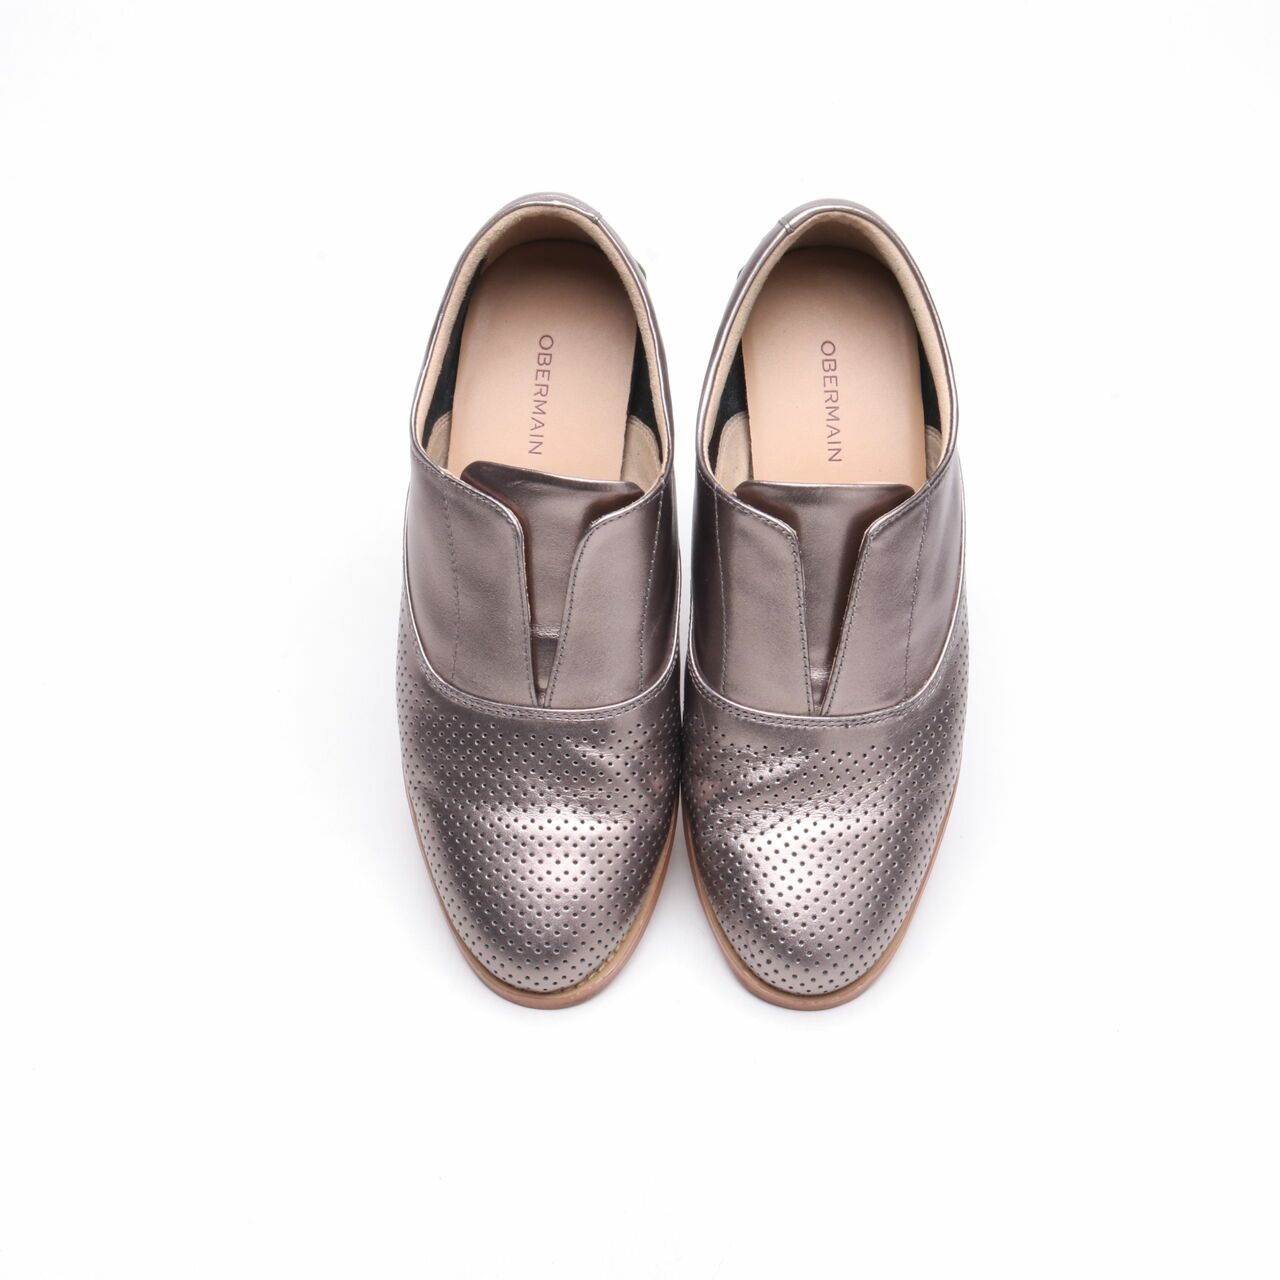 Obermain Gerry Andrina Silver Loafers